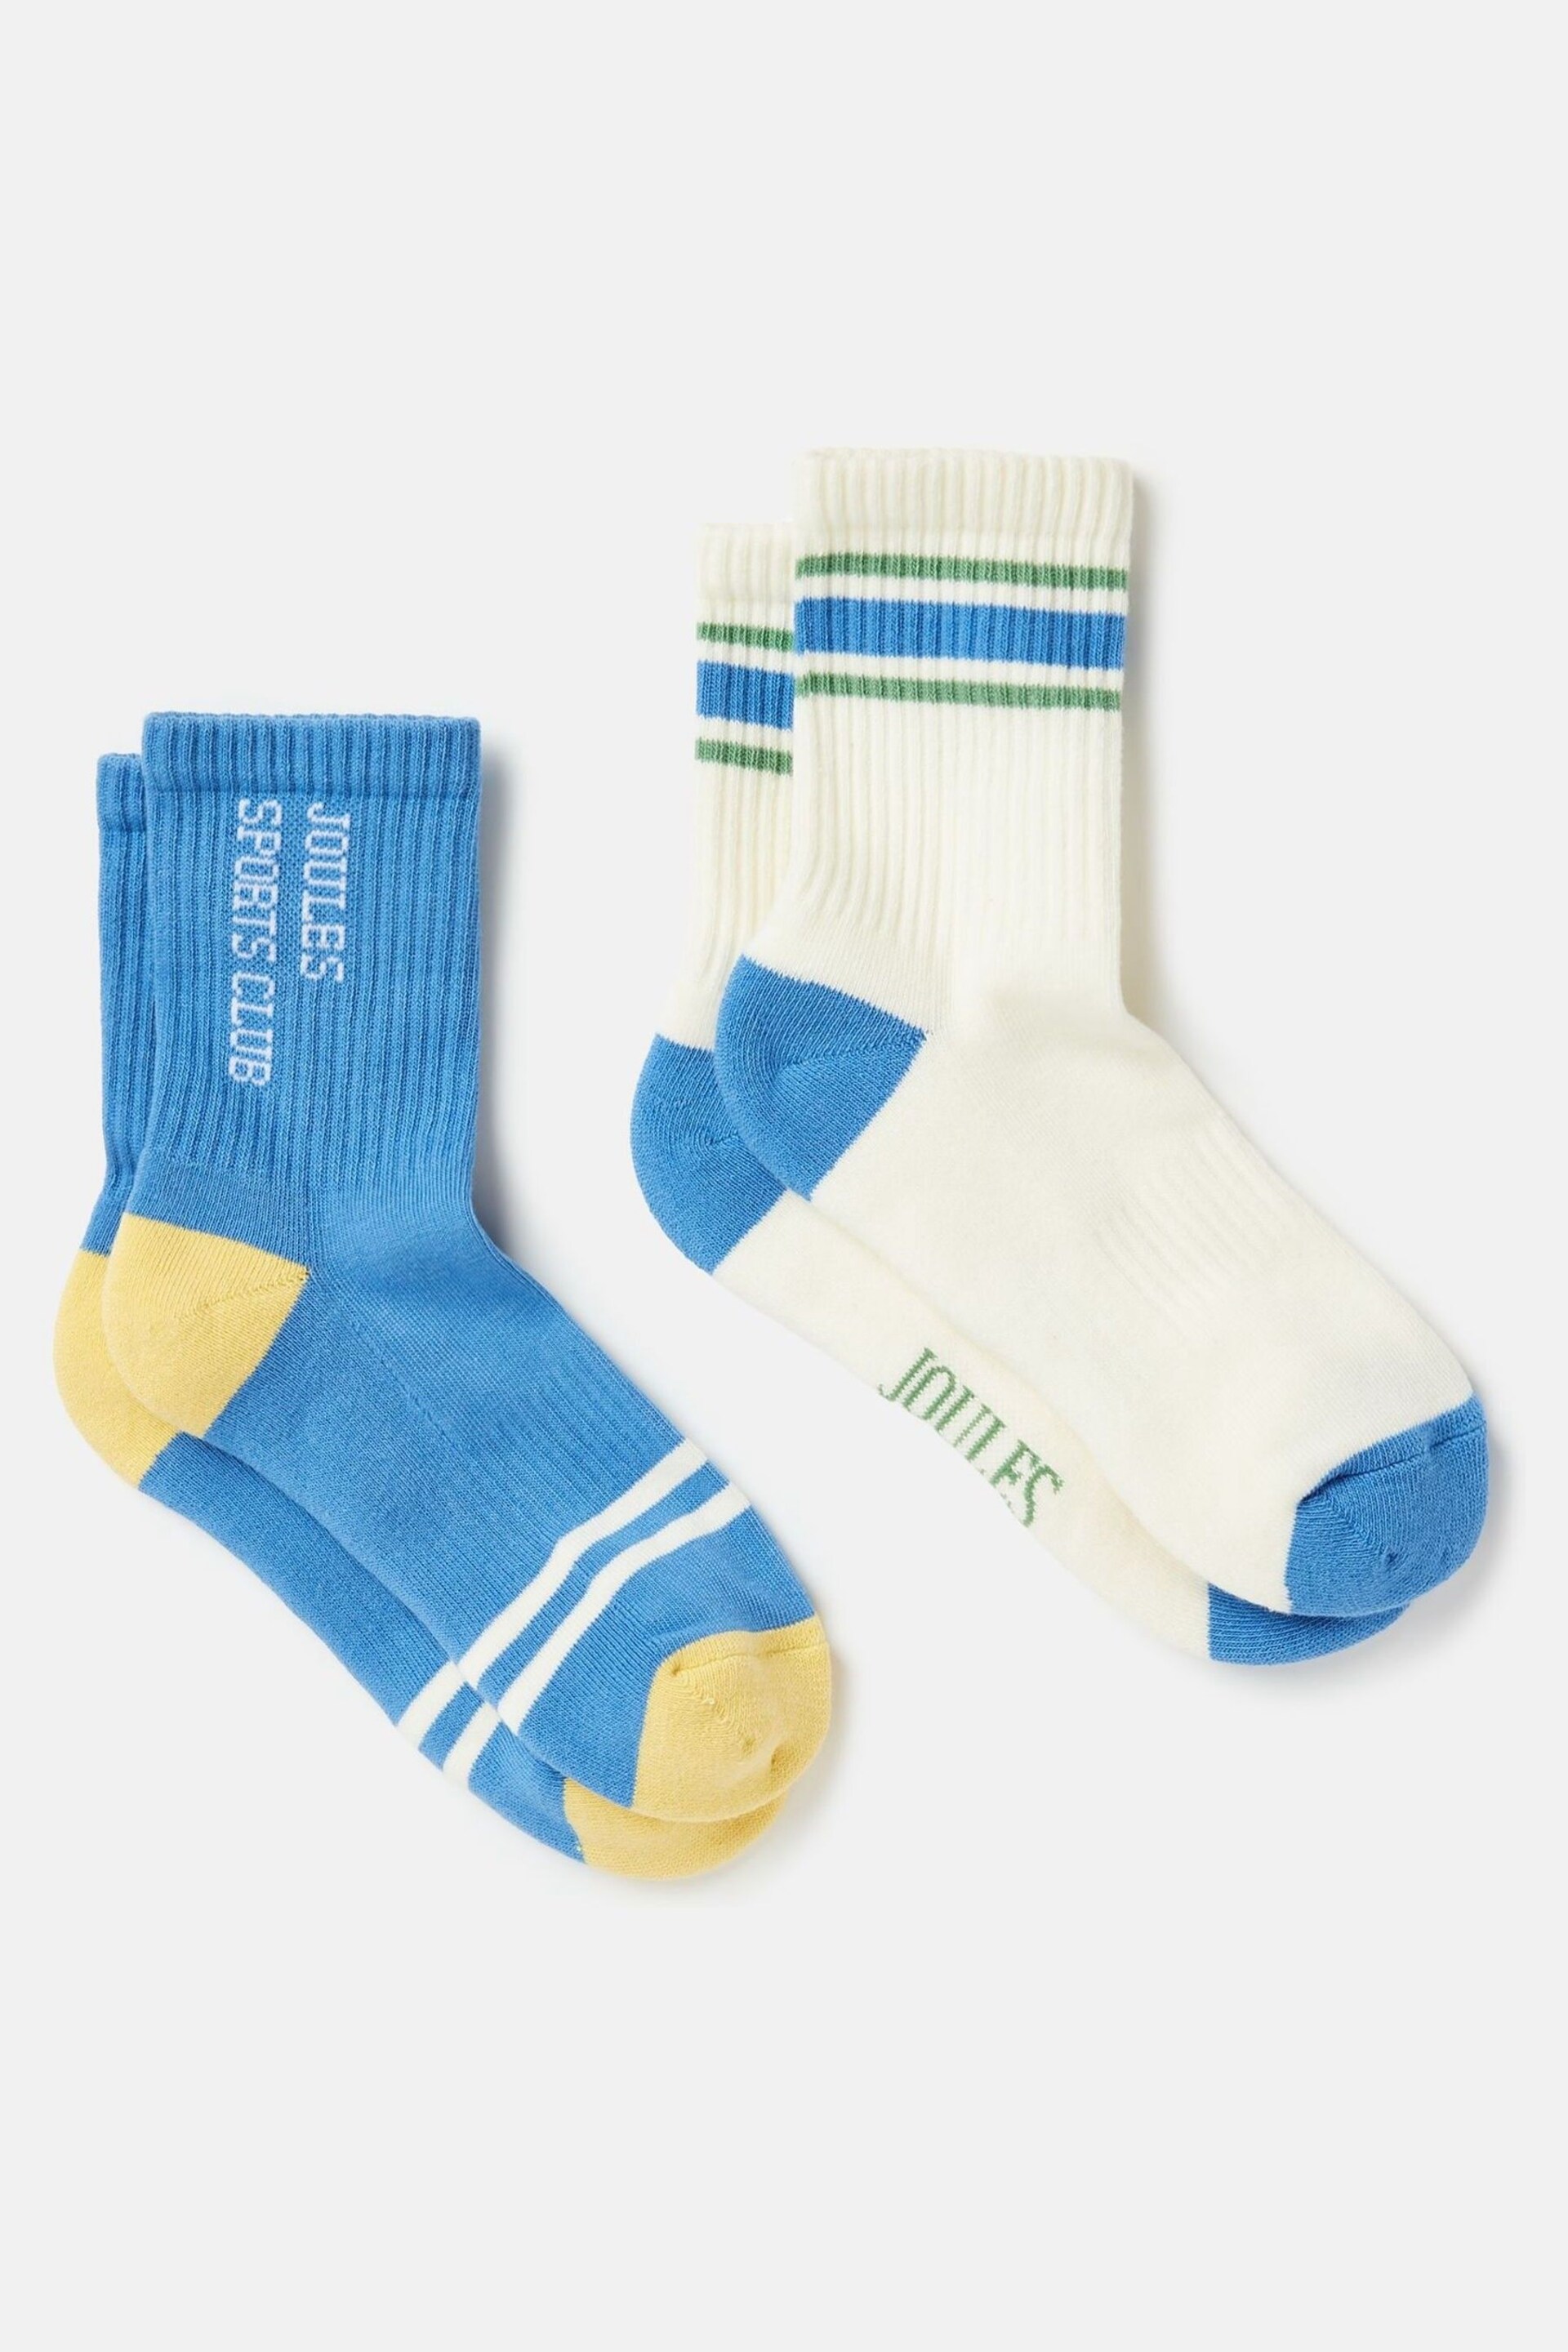 Joules Boys' Volley Blue Tennis Ankle Socks (2 Pack) - Image 1 of 3